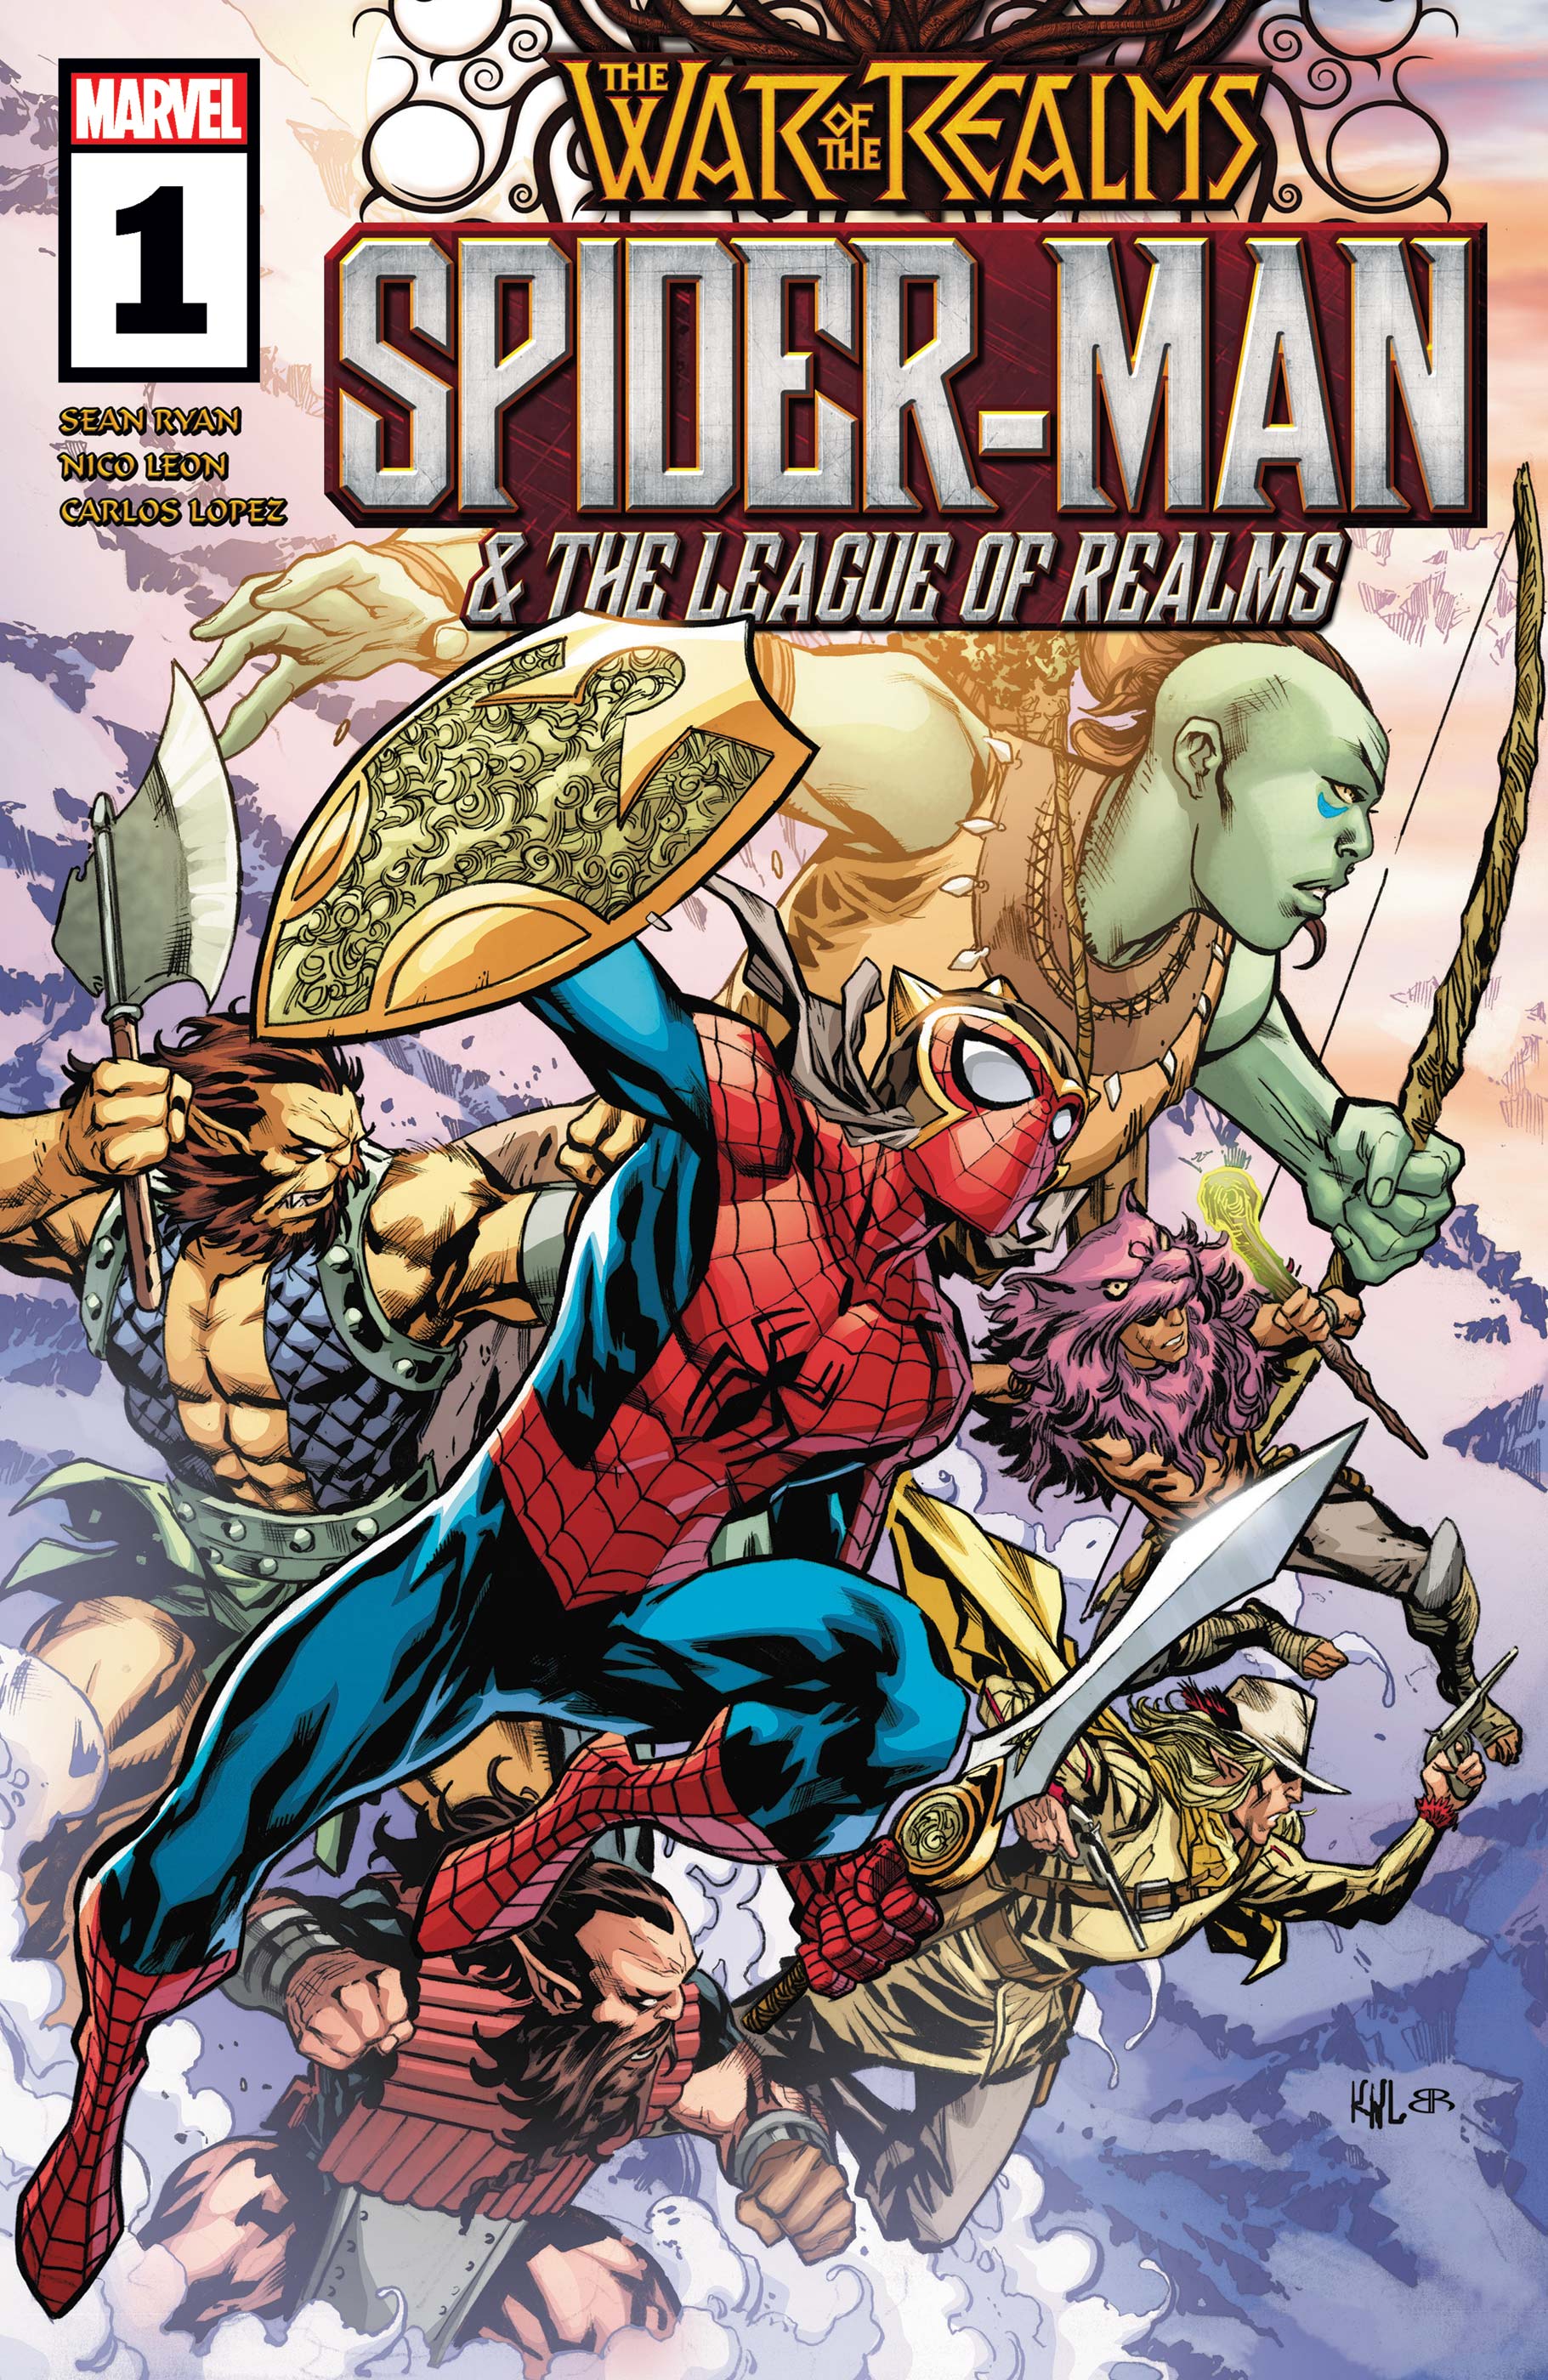 Spider-Man & the League of Realms (2019) #1